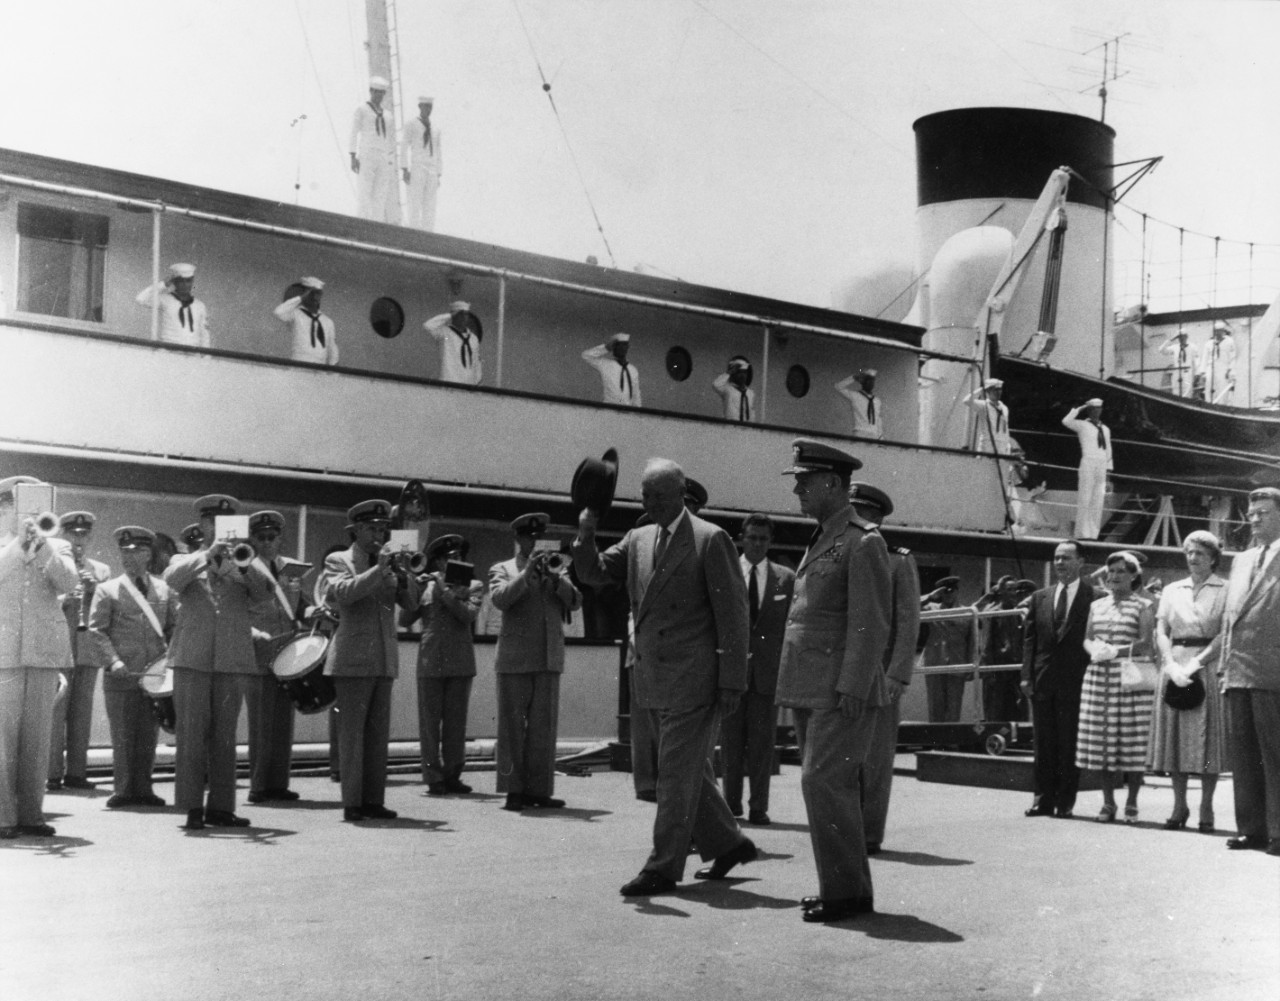 President Dwight D. Eisenhower disembarks from the presidential yacht USS Williamsburg (AGC-369) at the Washington Navy Yard, probably in May 1953